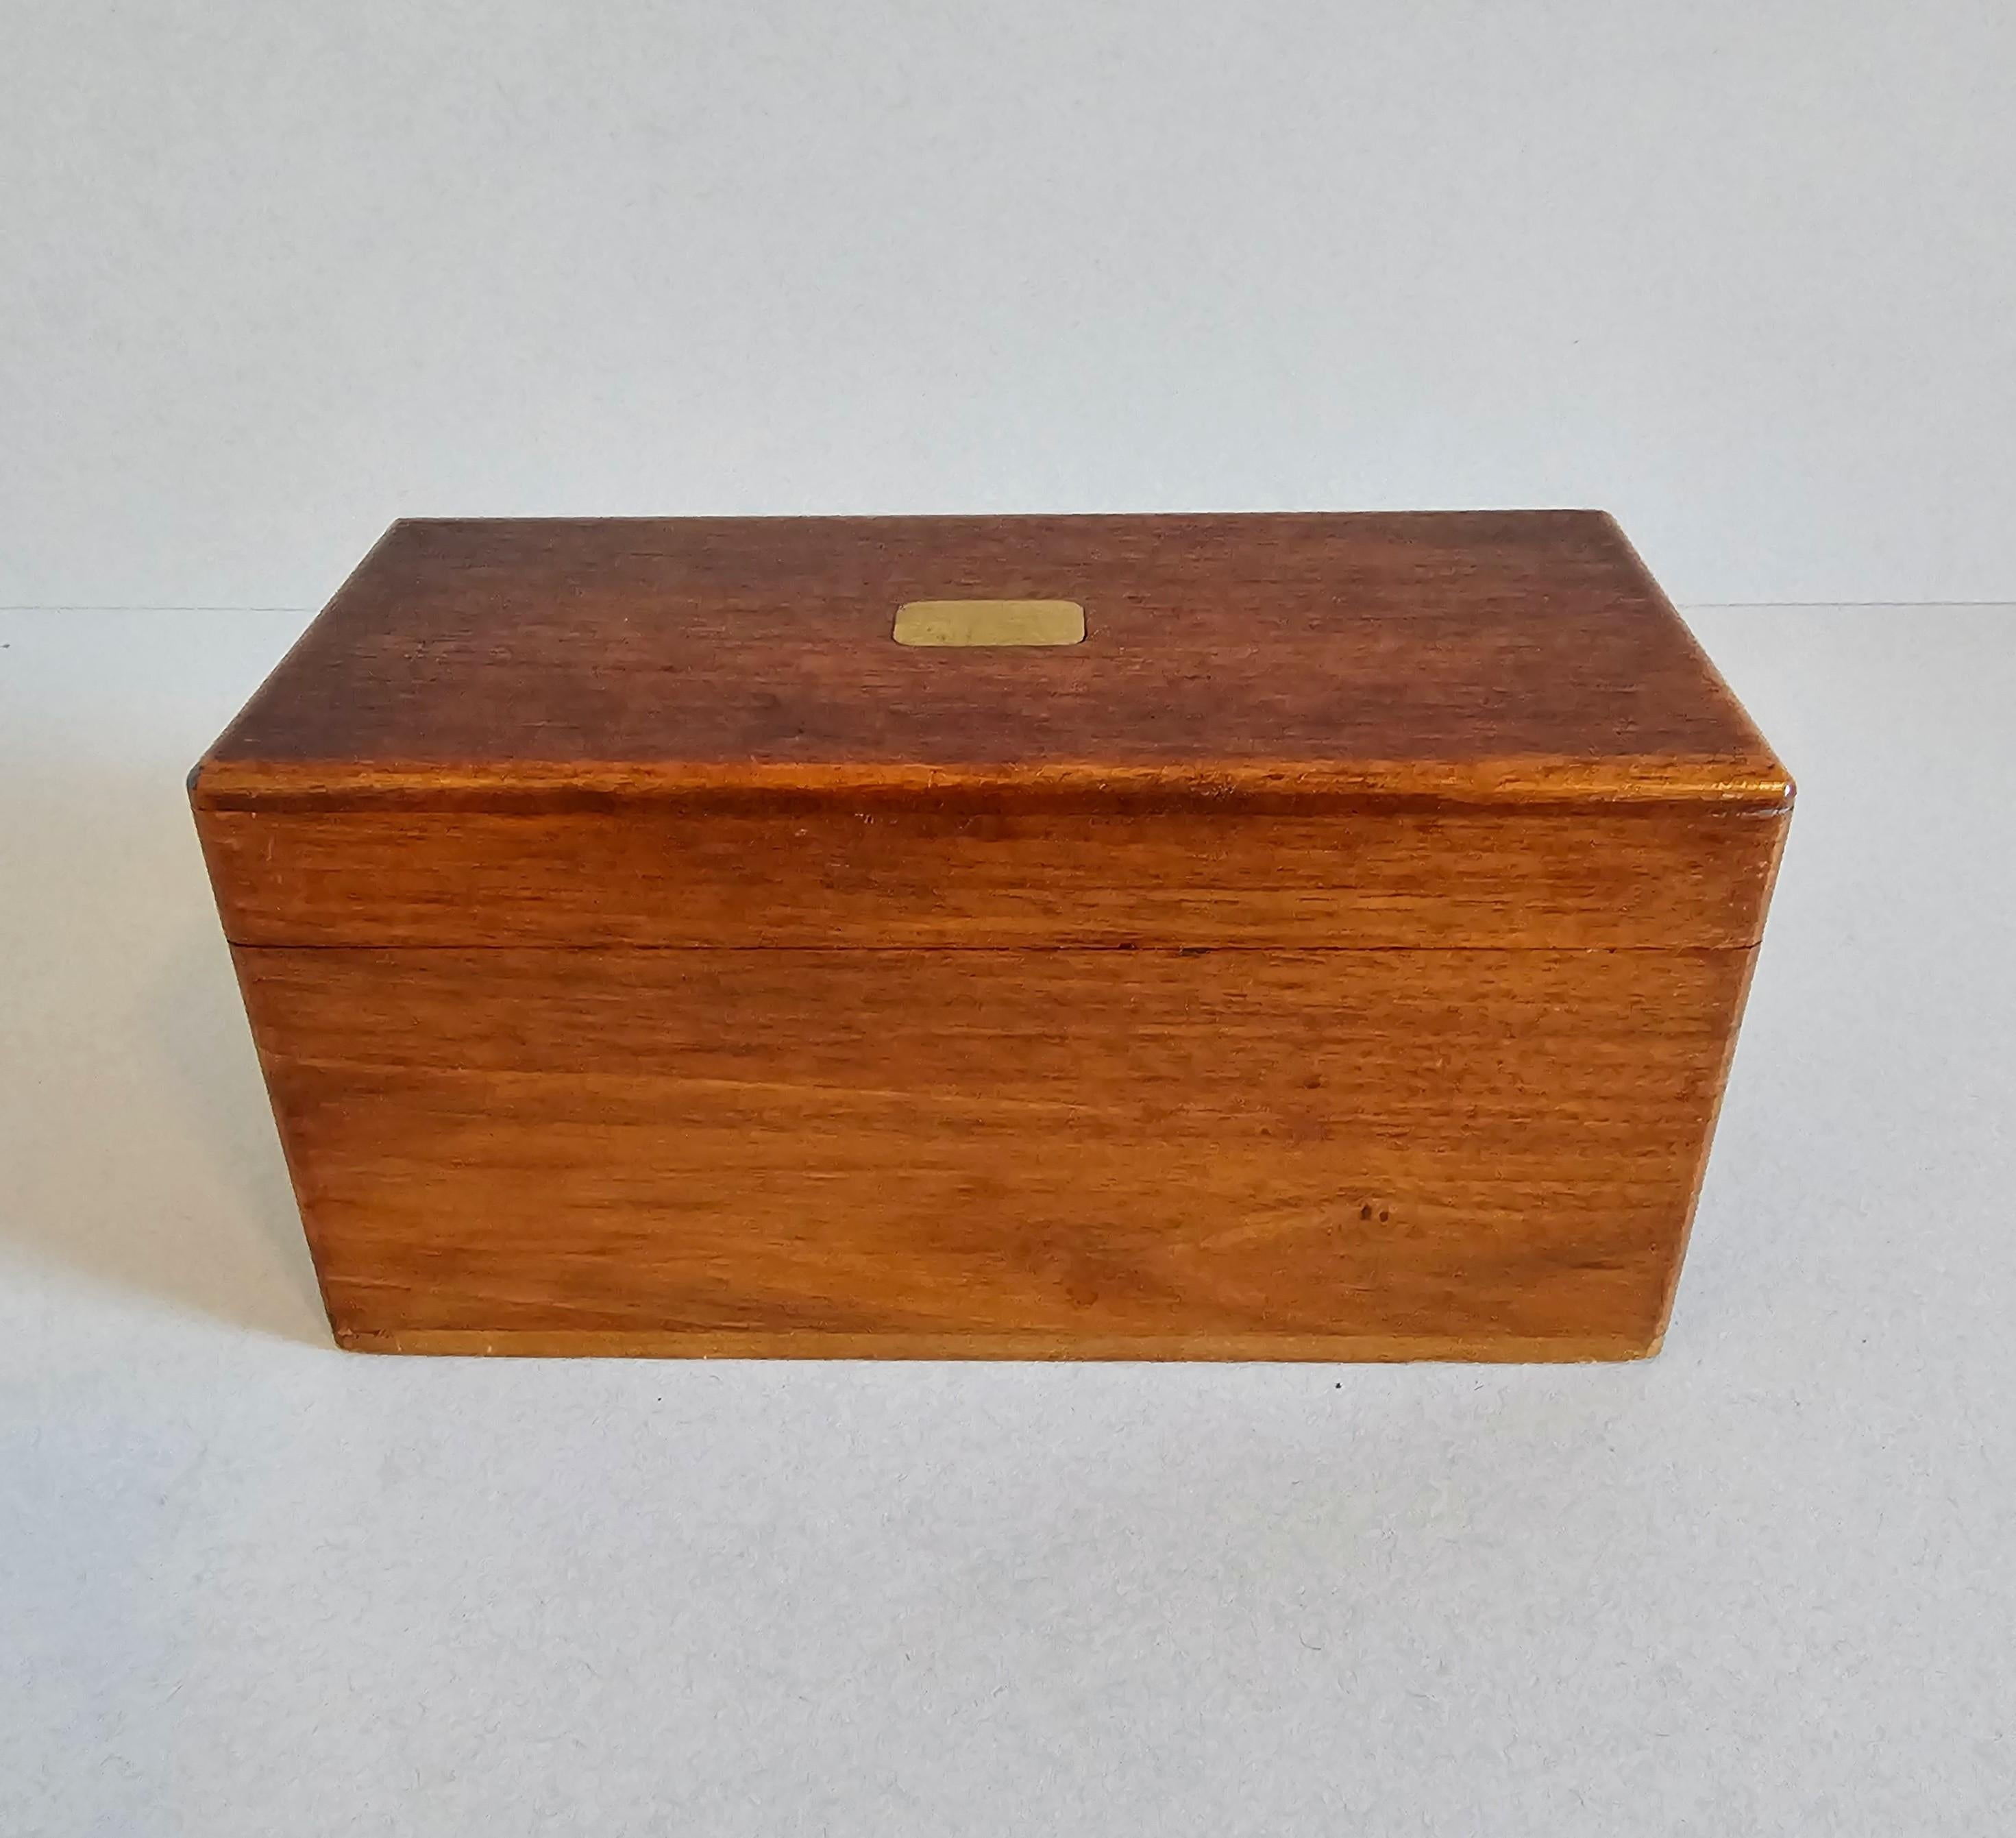 Hand-Crafted Antique English Mahogany Table Box With Divided Interior  For Sale